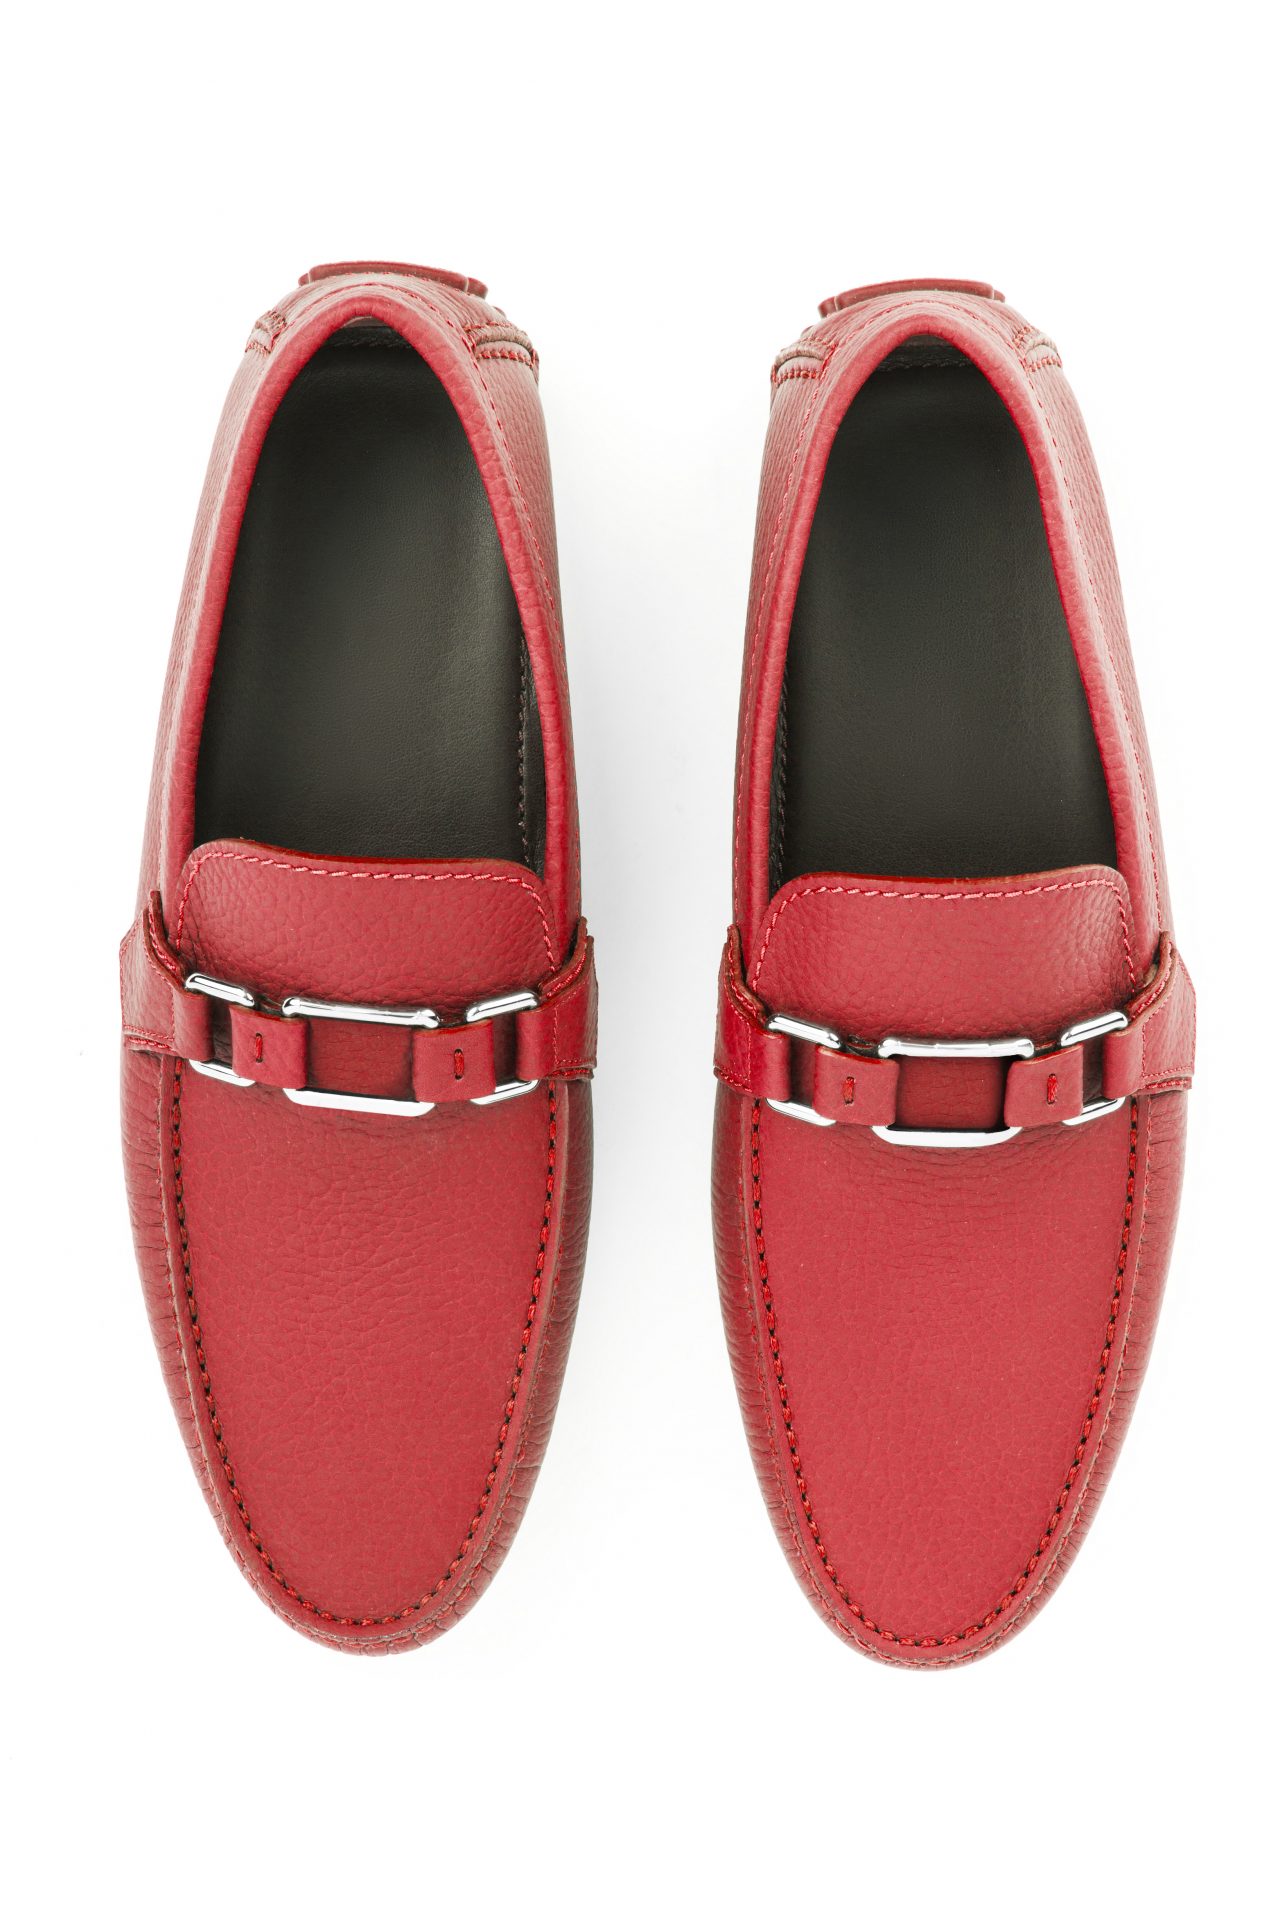 Red loafers